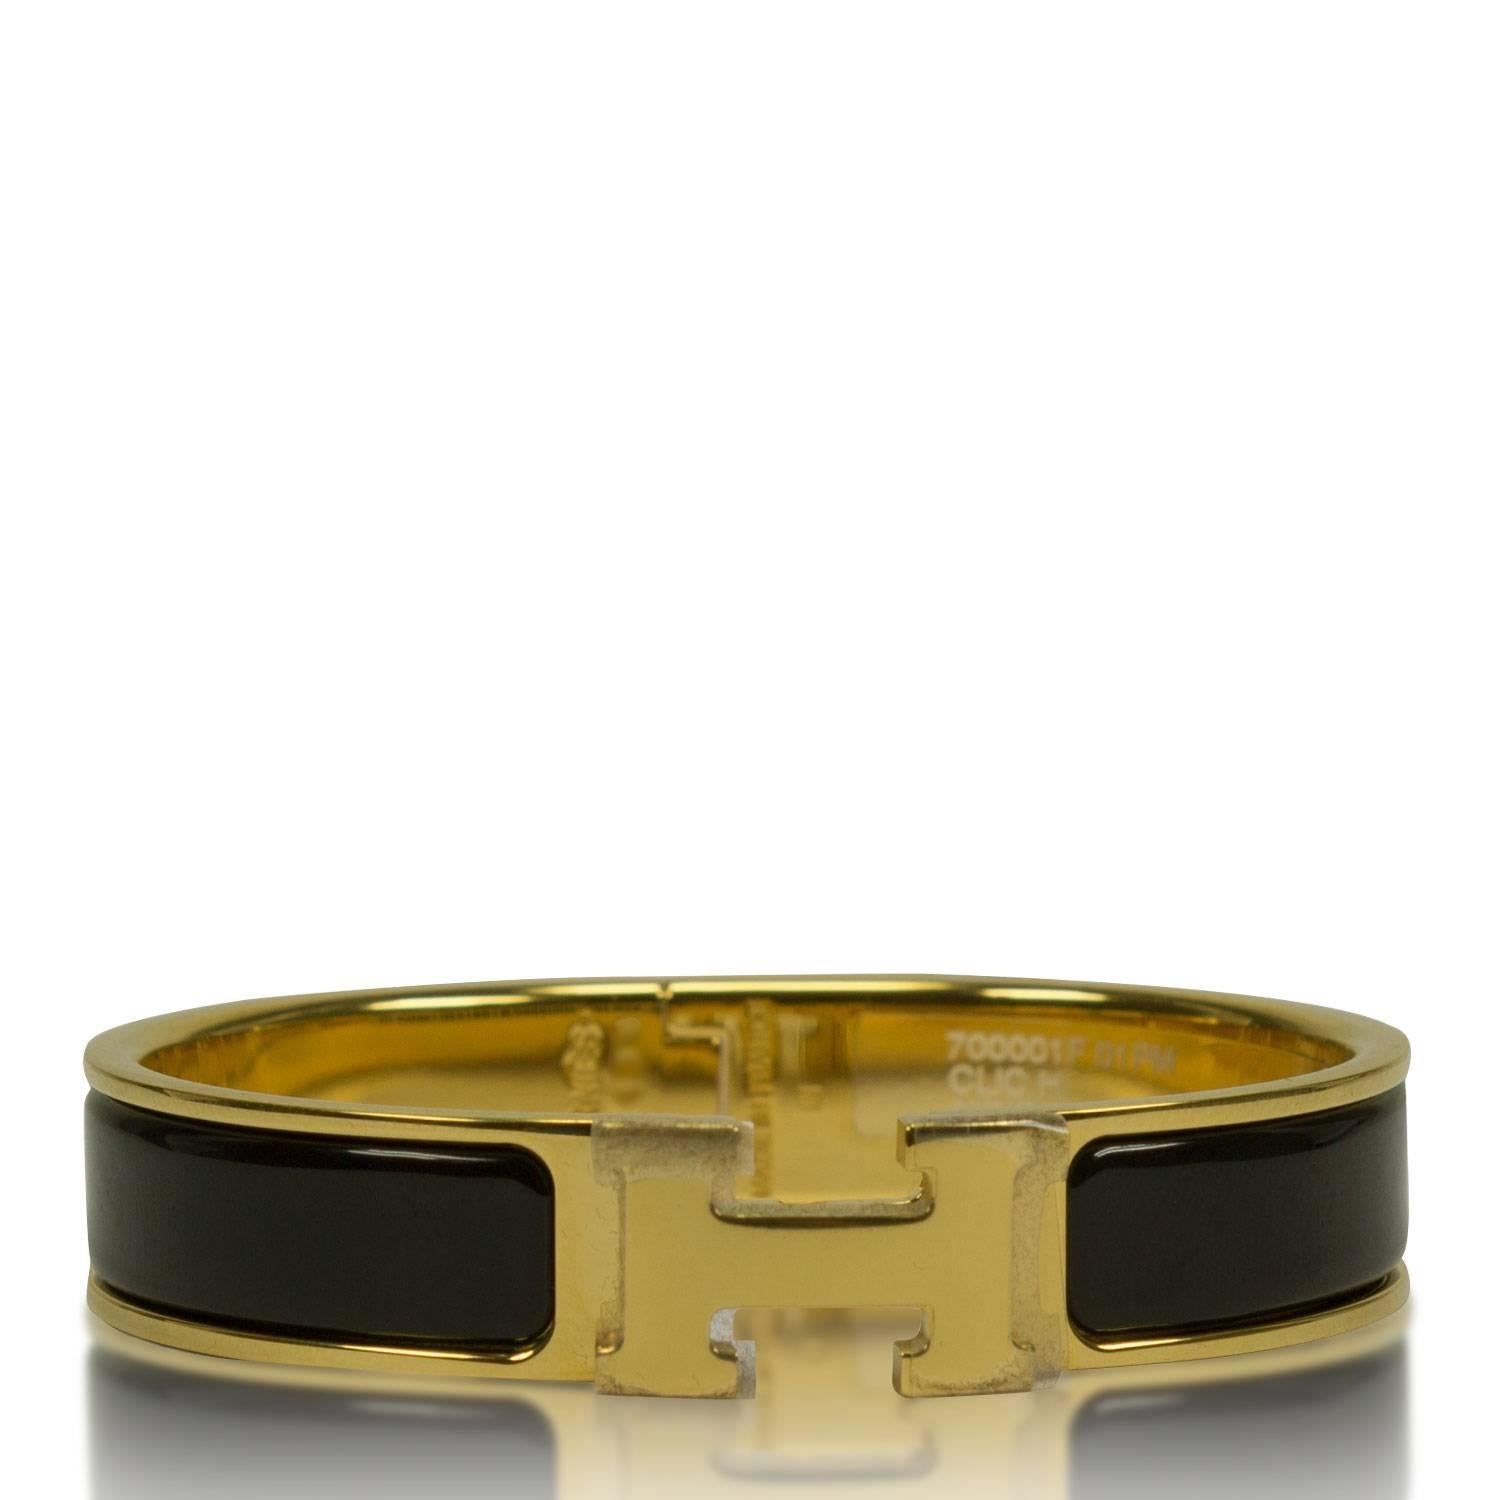 Hermes Bracelet Clic Clac H Gold Enamel Black Color PM Heigth 2016

Pre-owned and never used.

Bought it in Hermes store in 2015.

Model; Clic Clac H.

Size; PM.

Color; 01-Gold Enamel Black.

Oval.
Two diameters. 5.4cm and